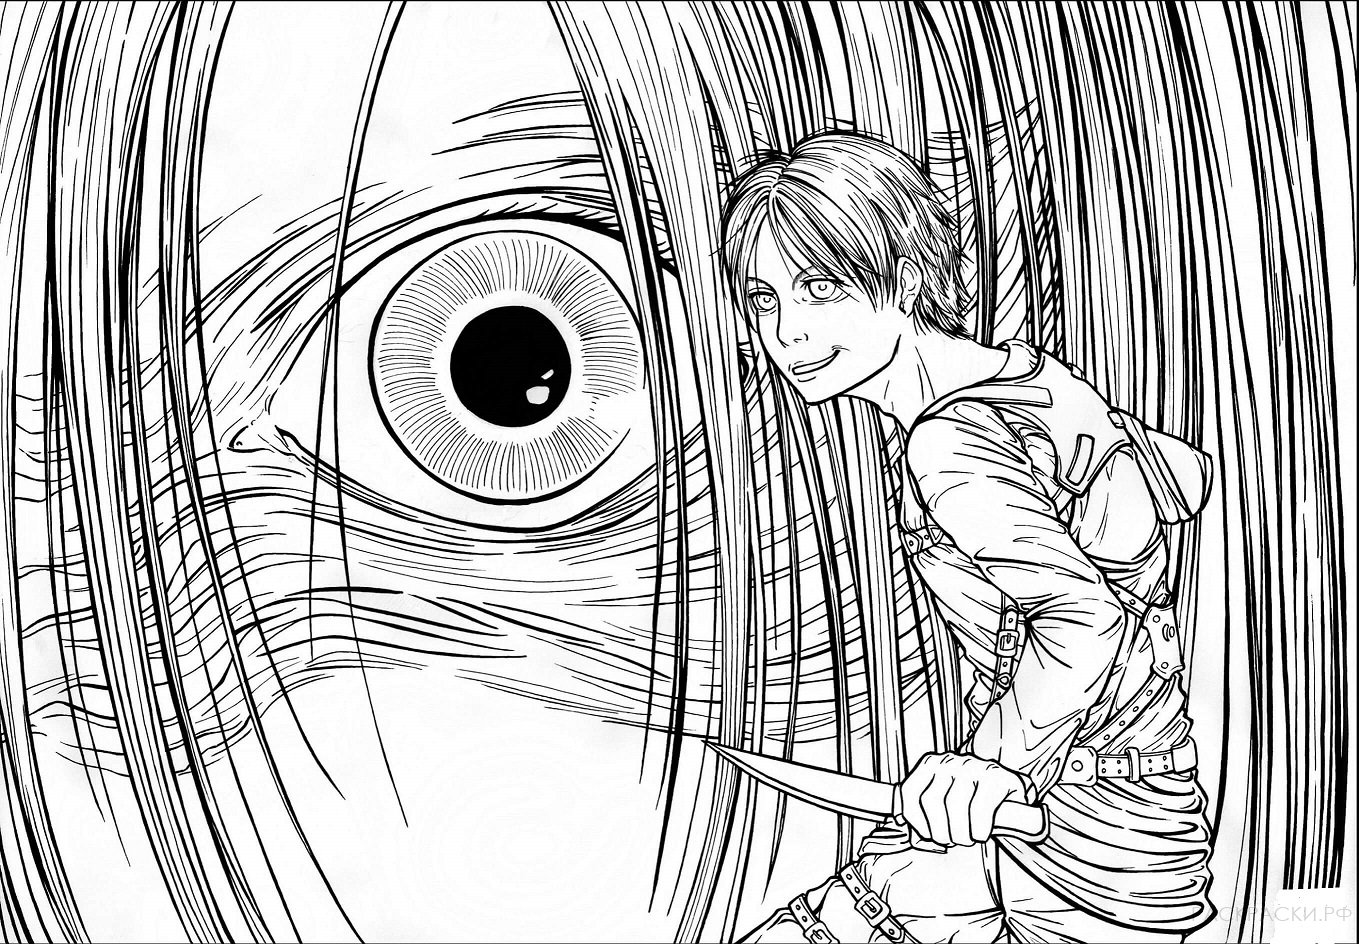 Attack of the Titans Coloring Pages to download and print for free